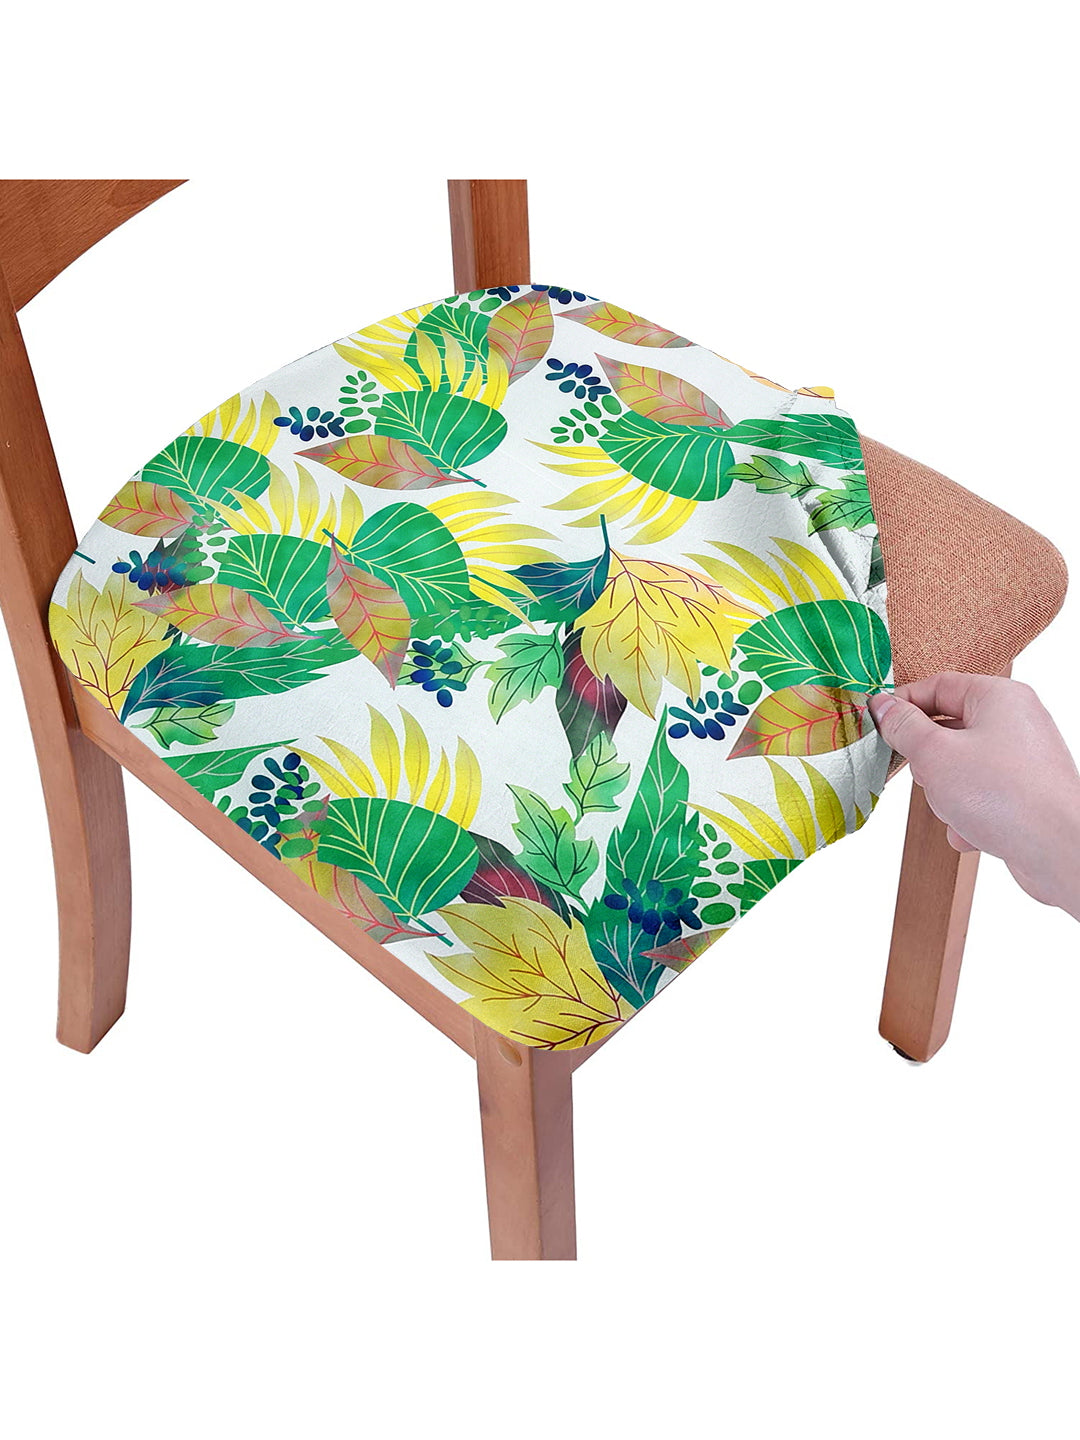 Stretchable Floral Printed Non Slip Chair Pad Cover Pack of 6- Green